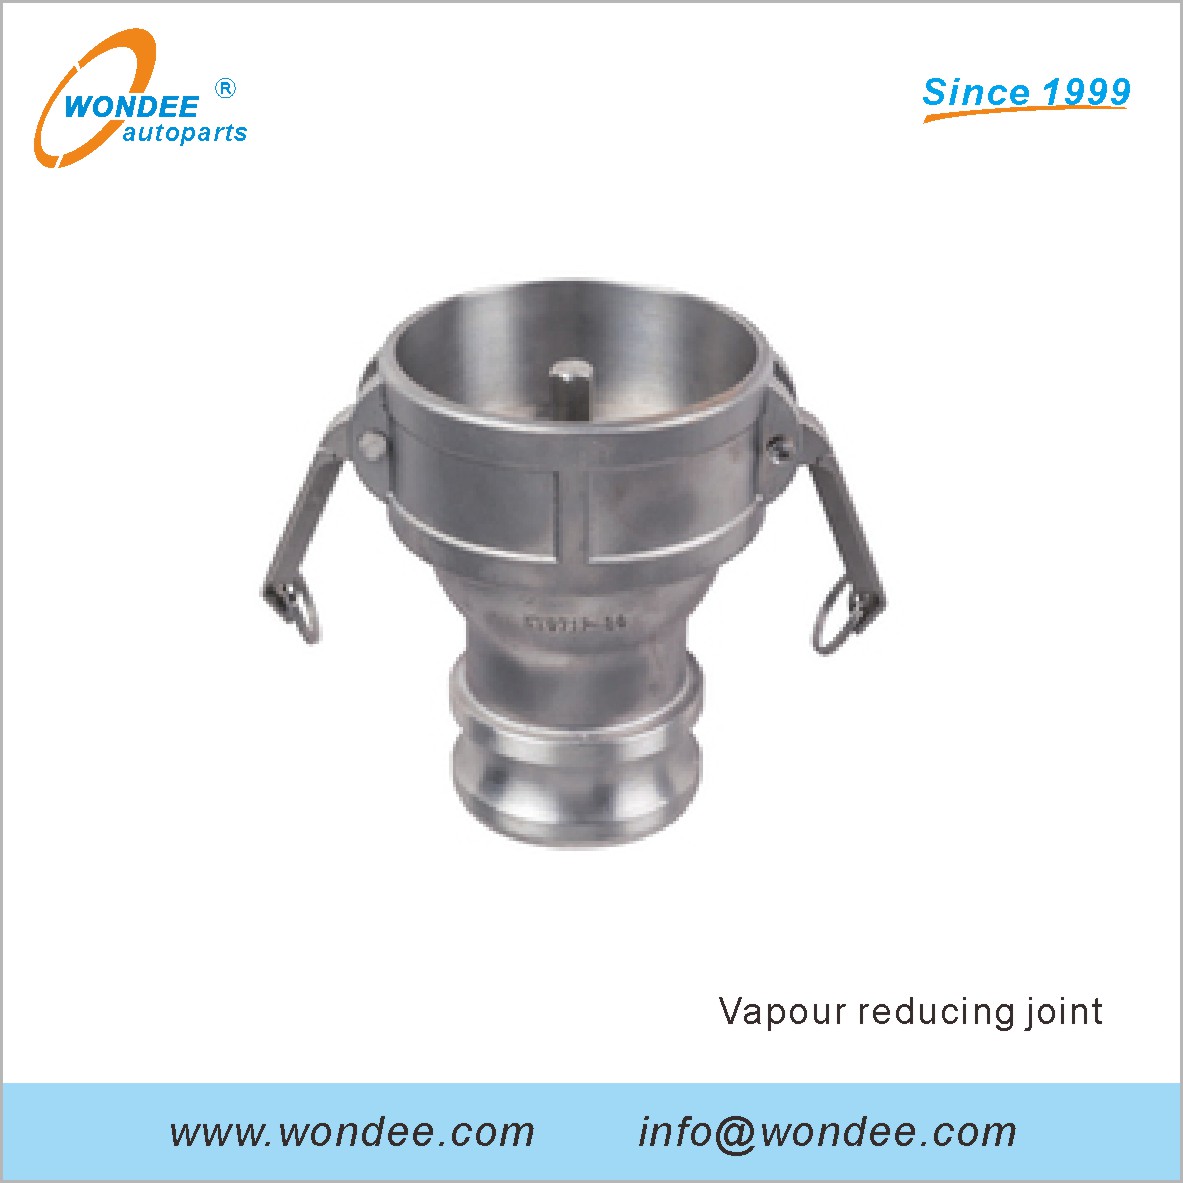 Vapour Reducing Joint for Fuel Tanker Truck Parts